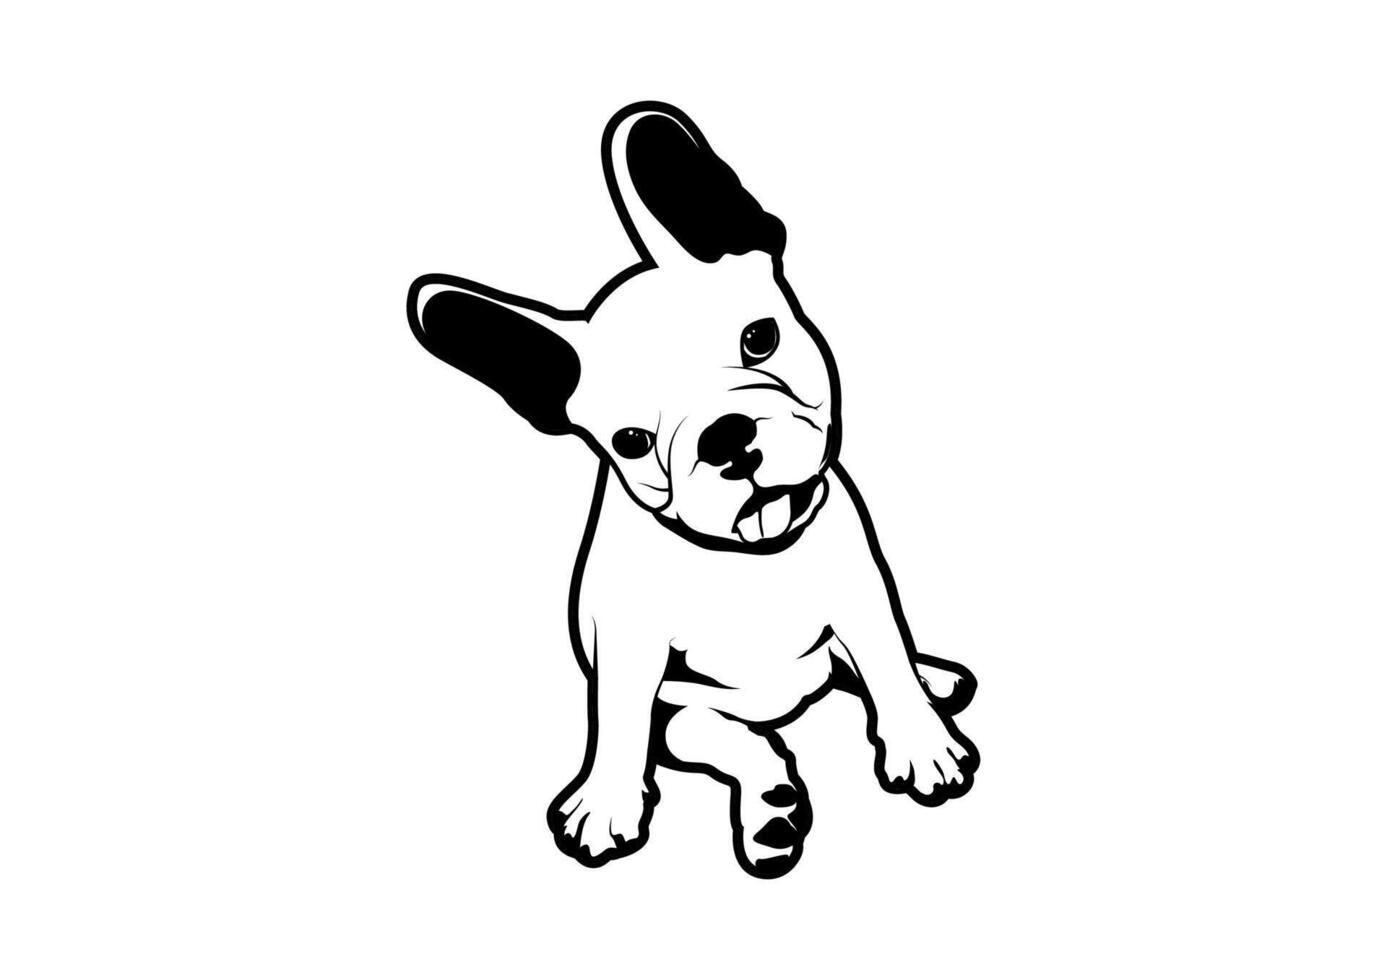 Cute little Frenchie is sitting on the floor and making an adorable action pose vector